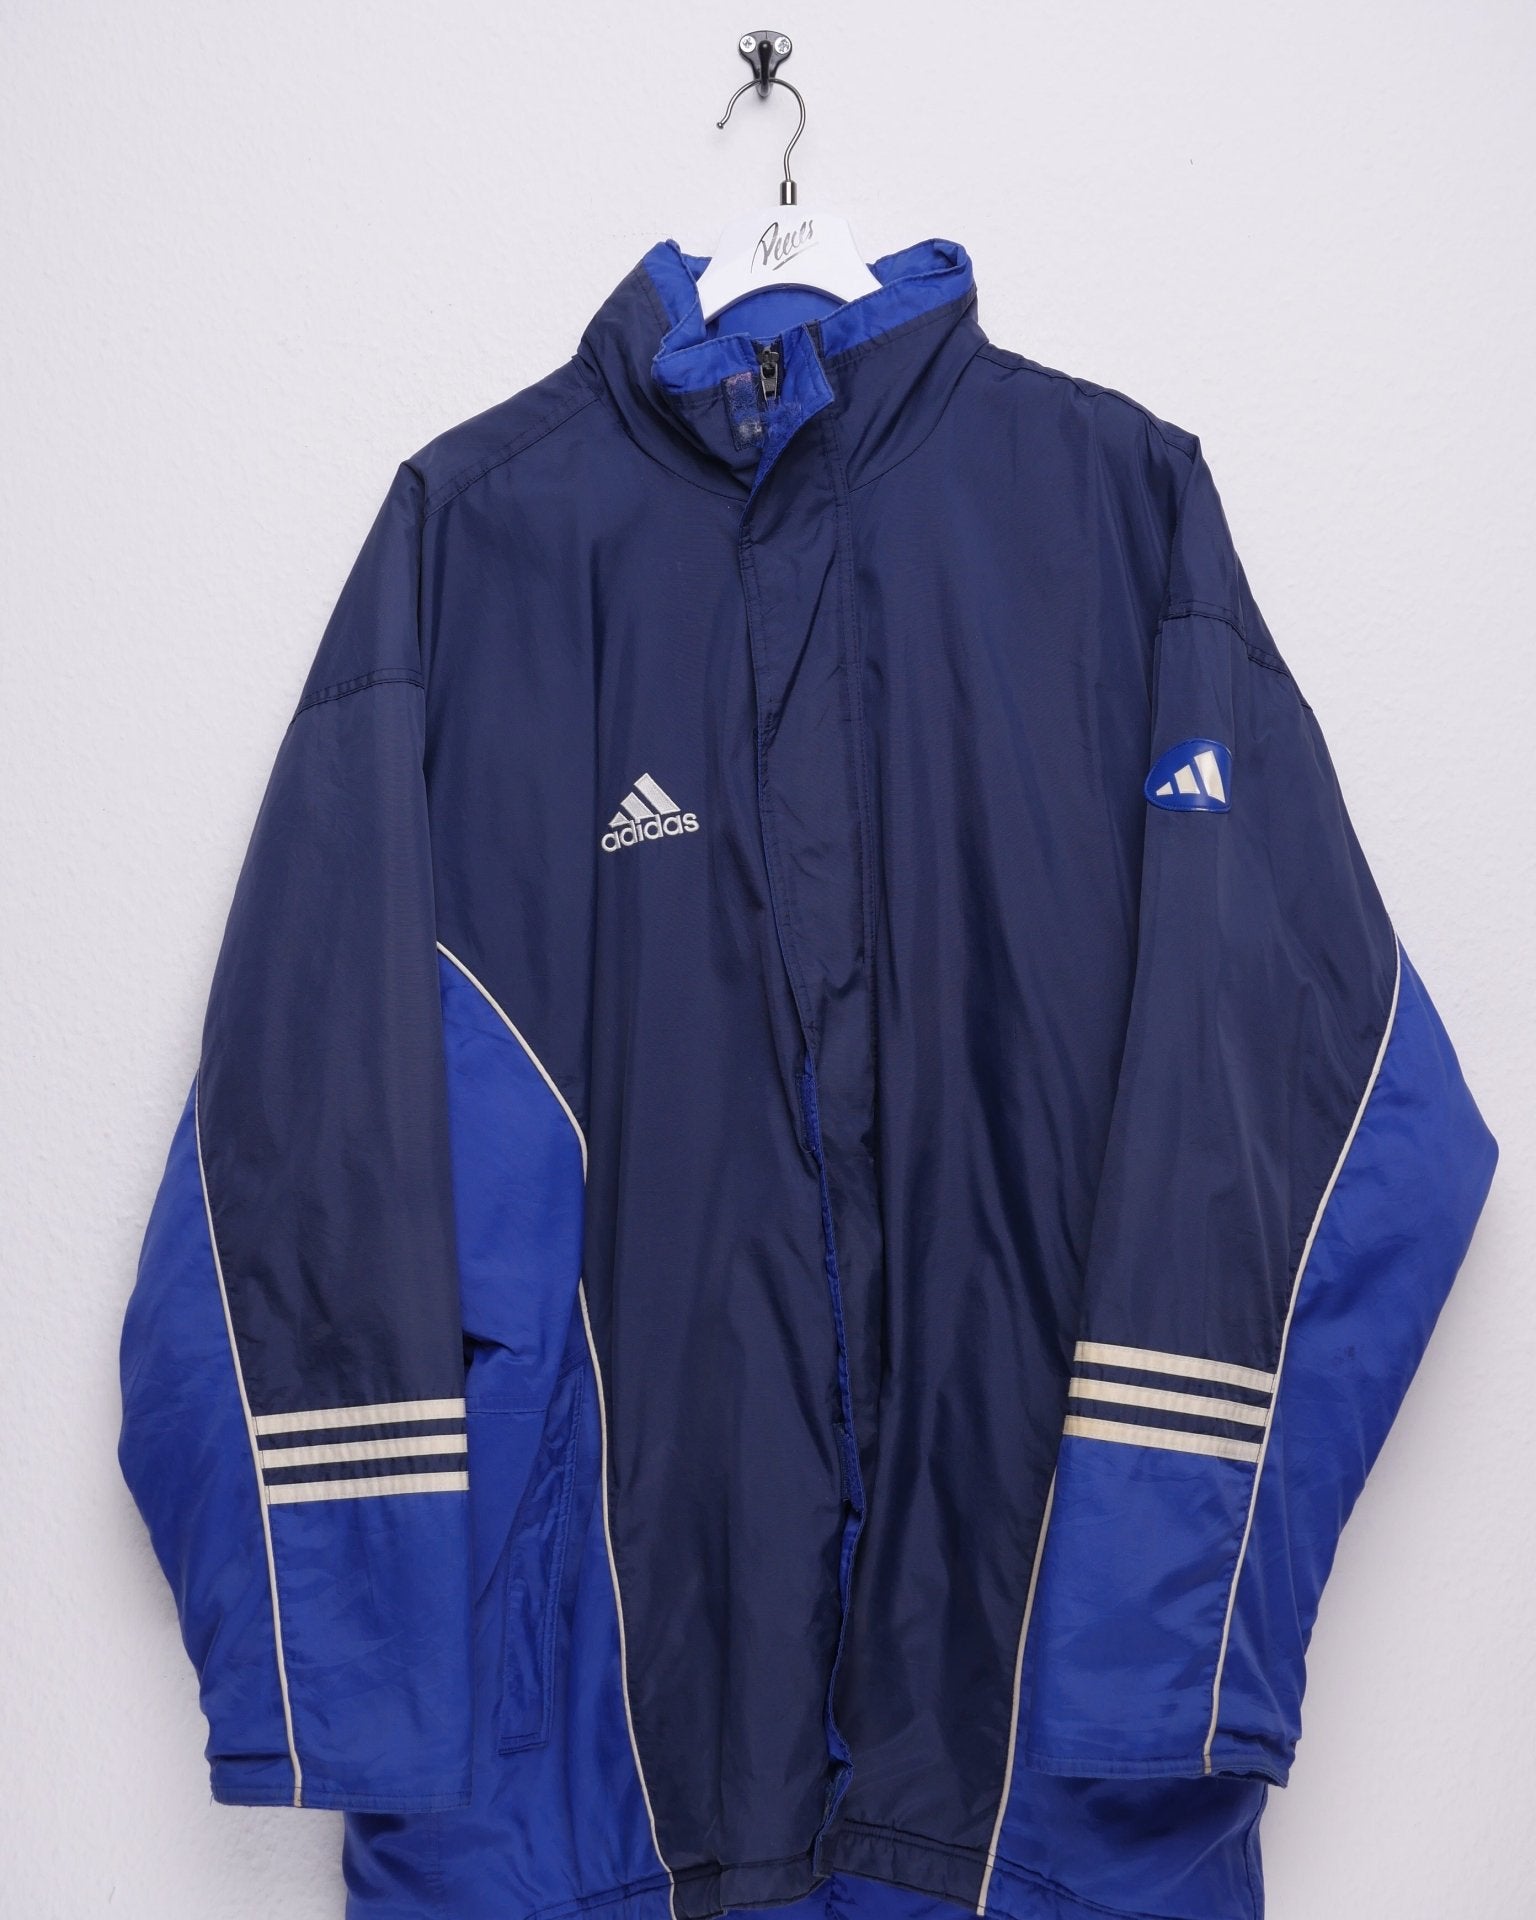 Adidas embroidered Logo two toned heavy Parker Jacket - Peeces